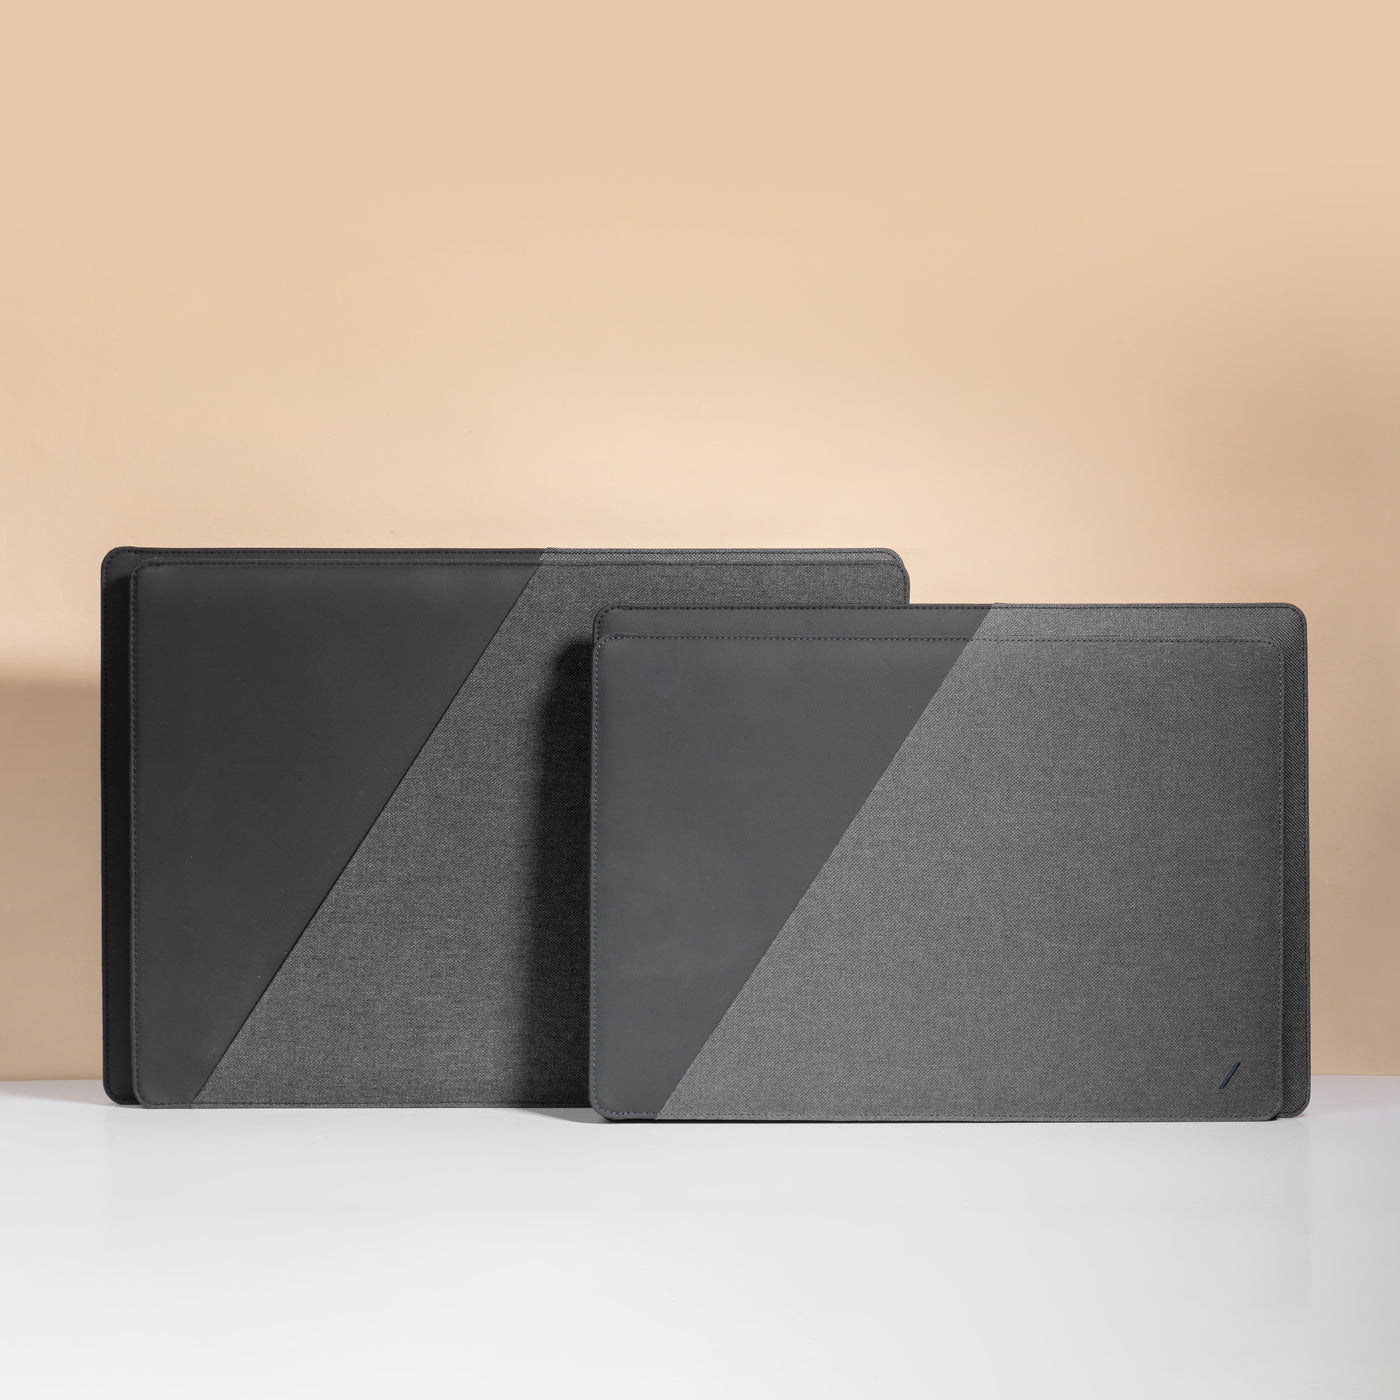 Stow Slim sleeve for MacBook 電腦保護套